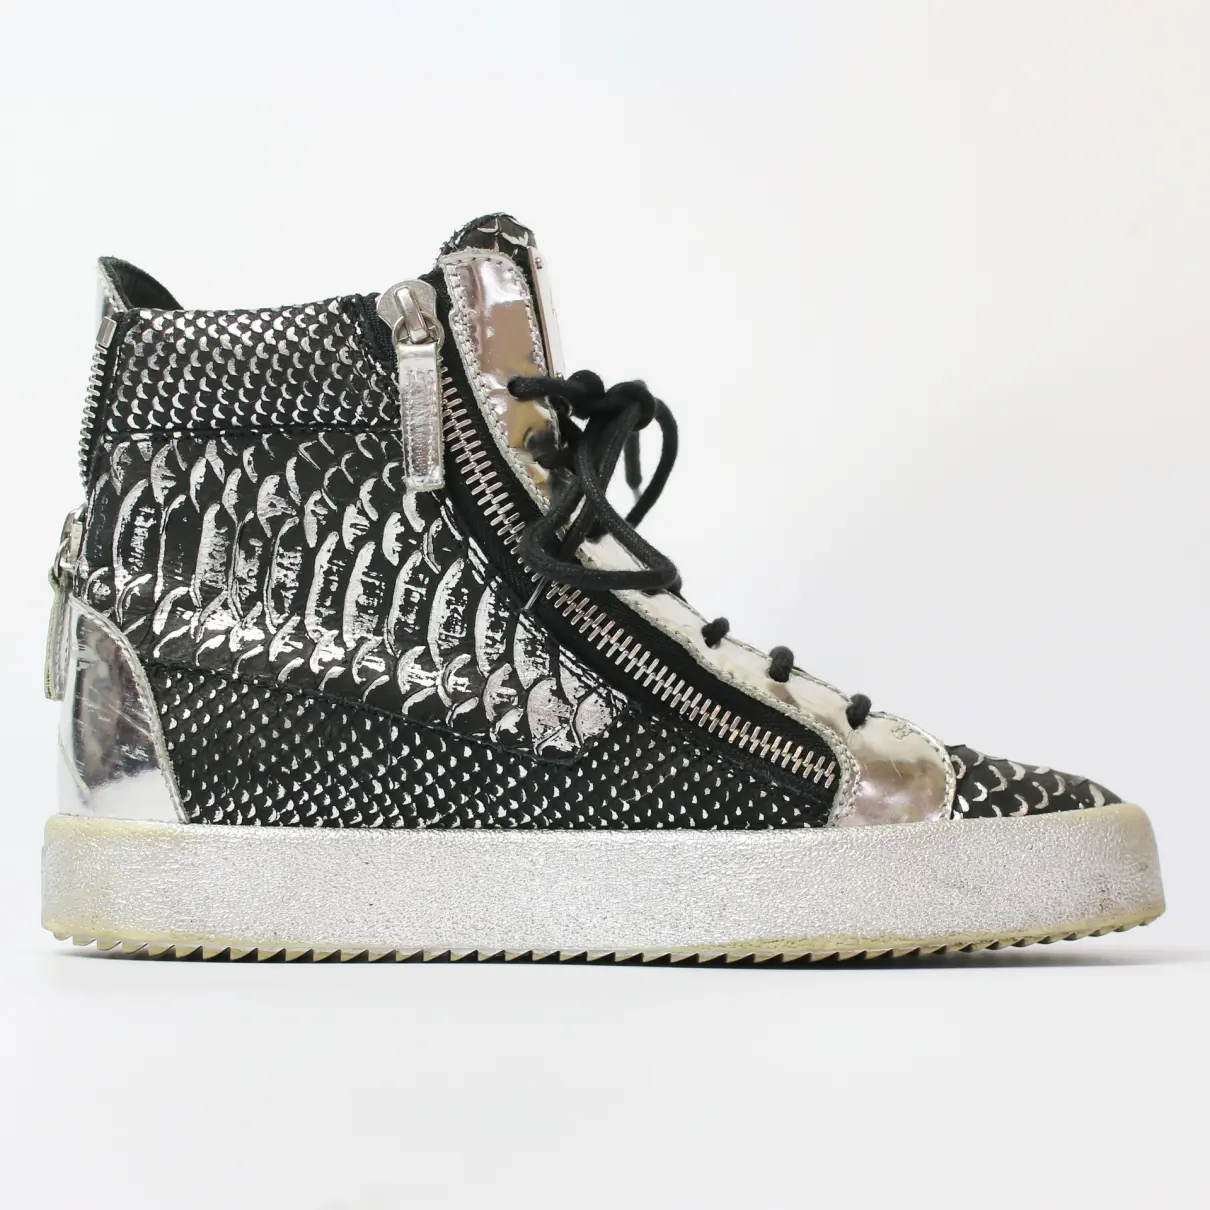 Buy Giuseppe Zanotti Coby leather high trainers online